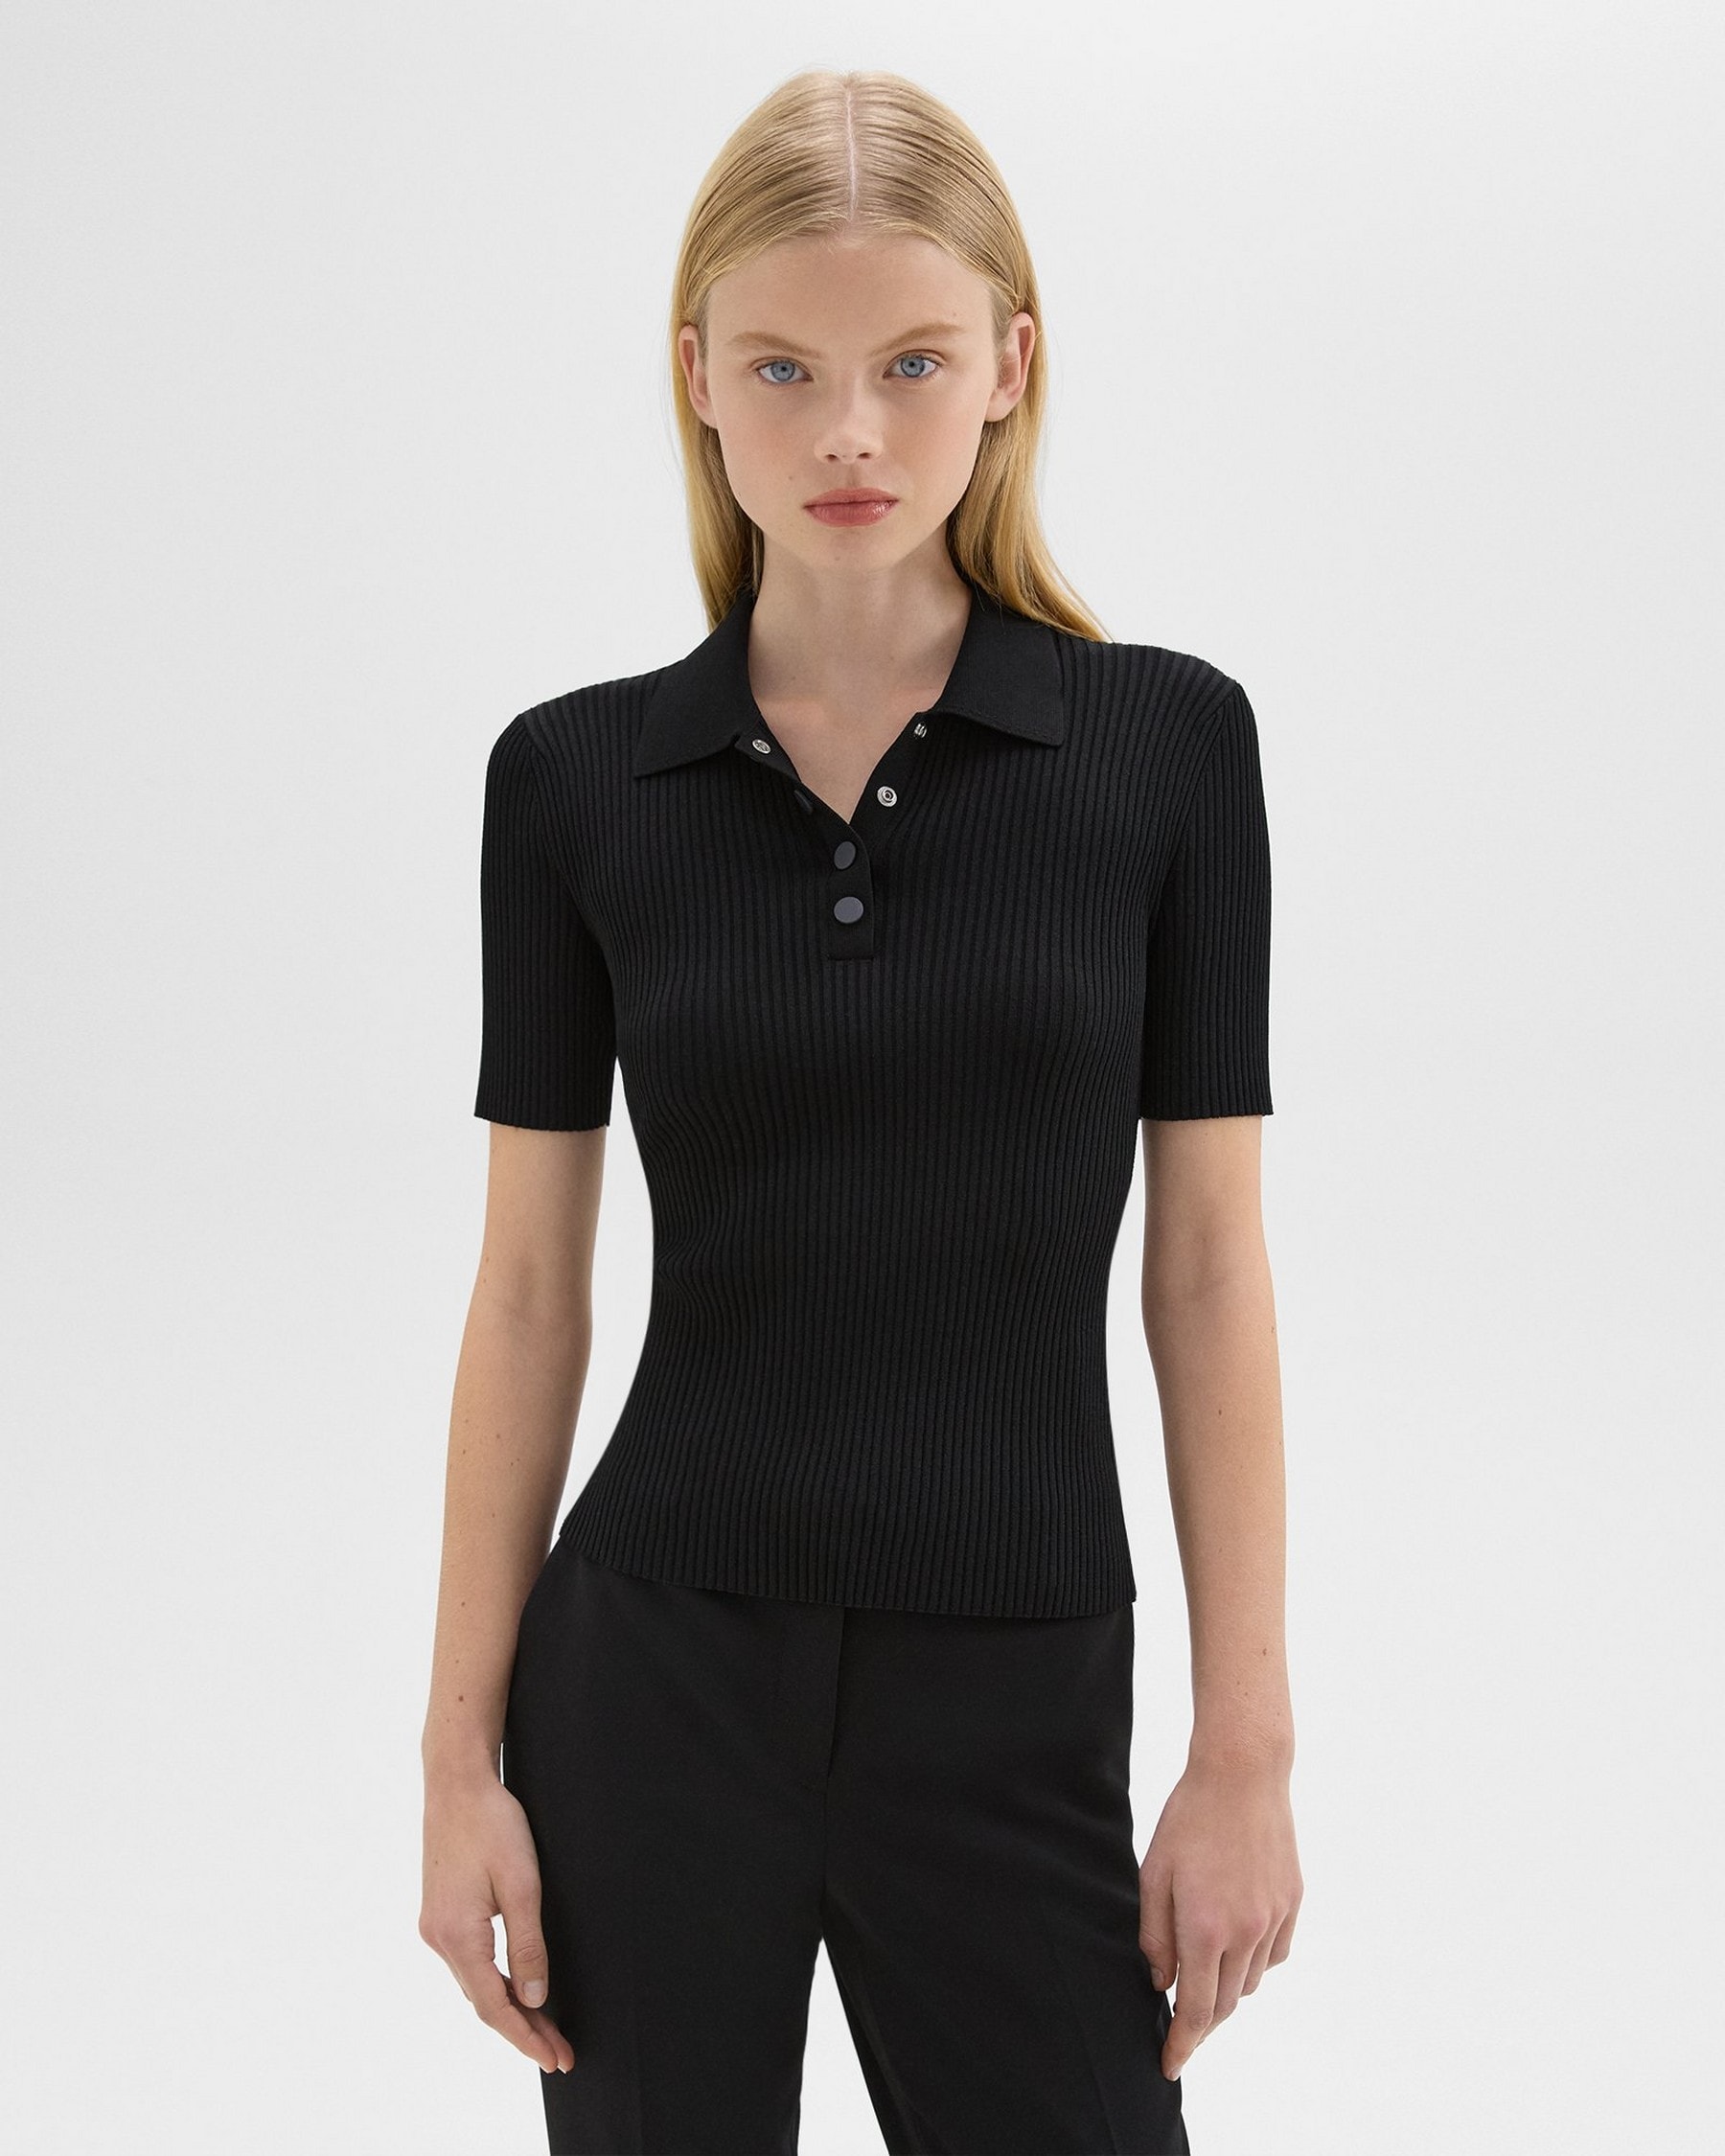 Ribbed Polo in Crepe Knit